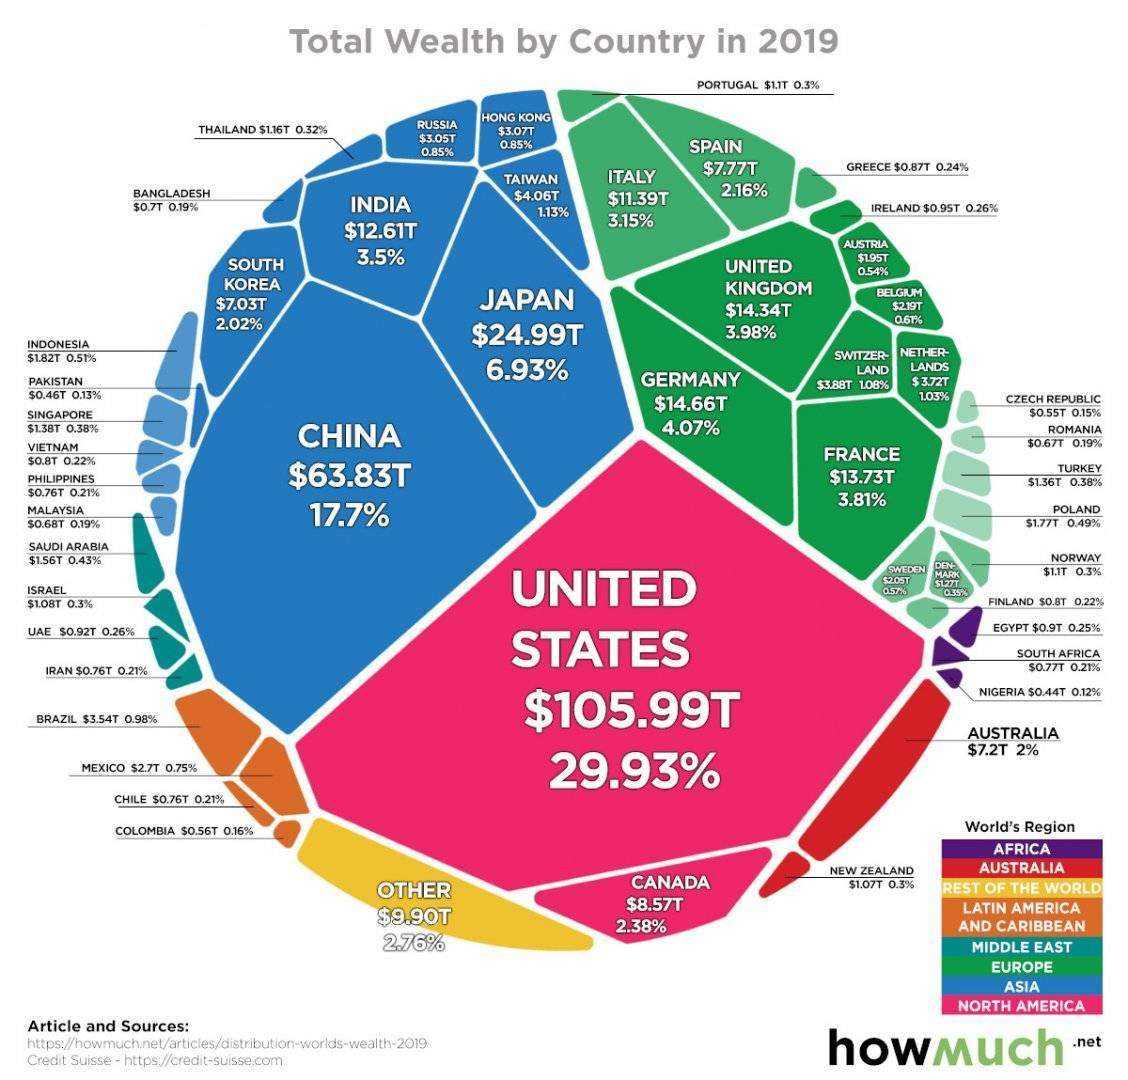 global-wealth-by-country-2019-v2.jpg